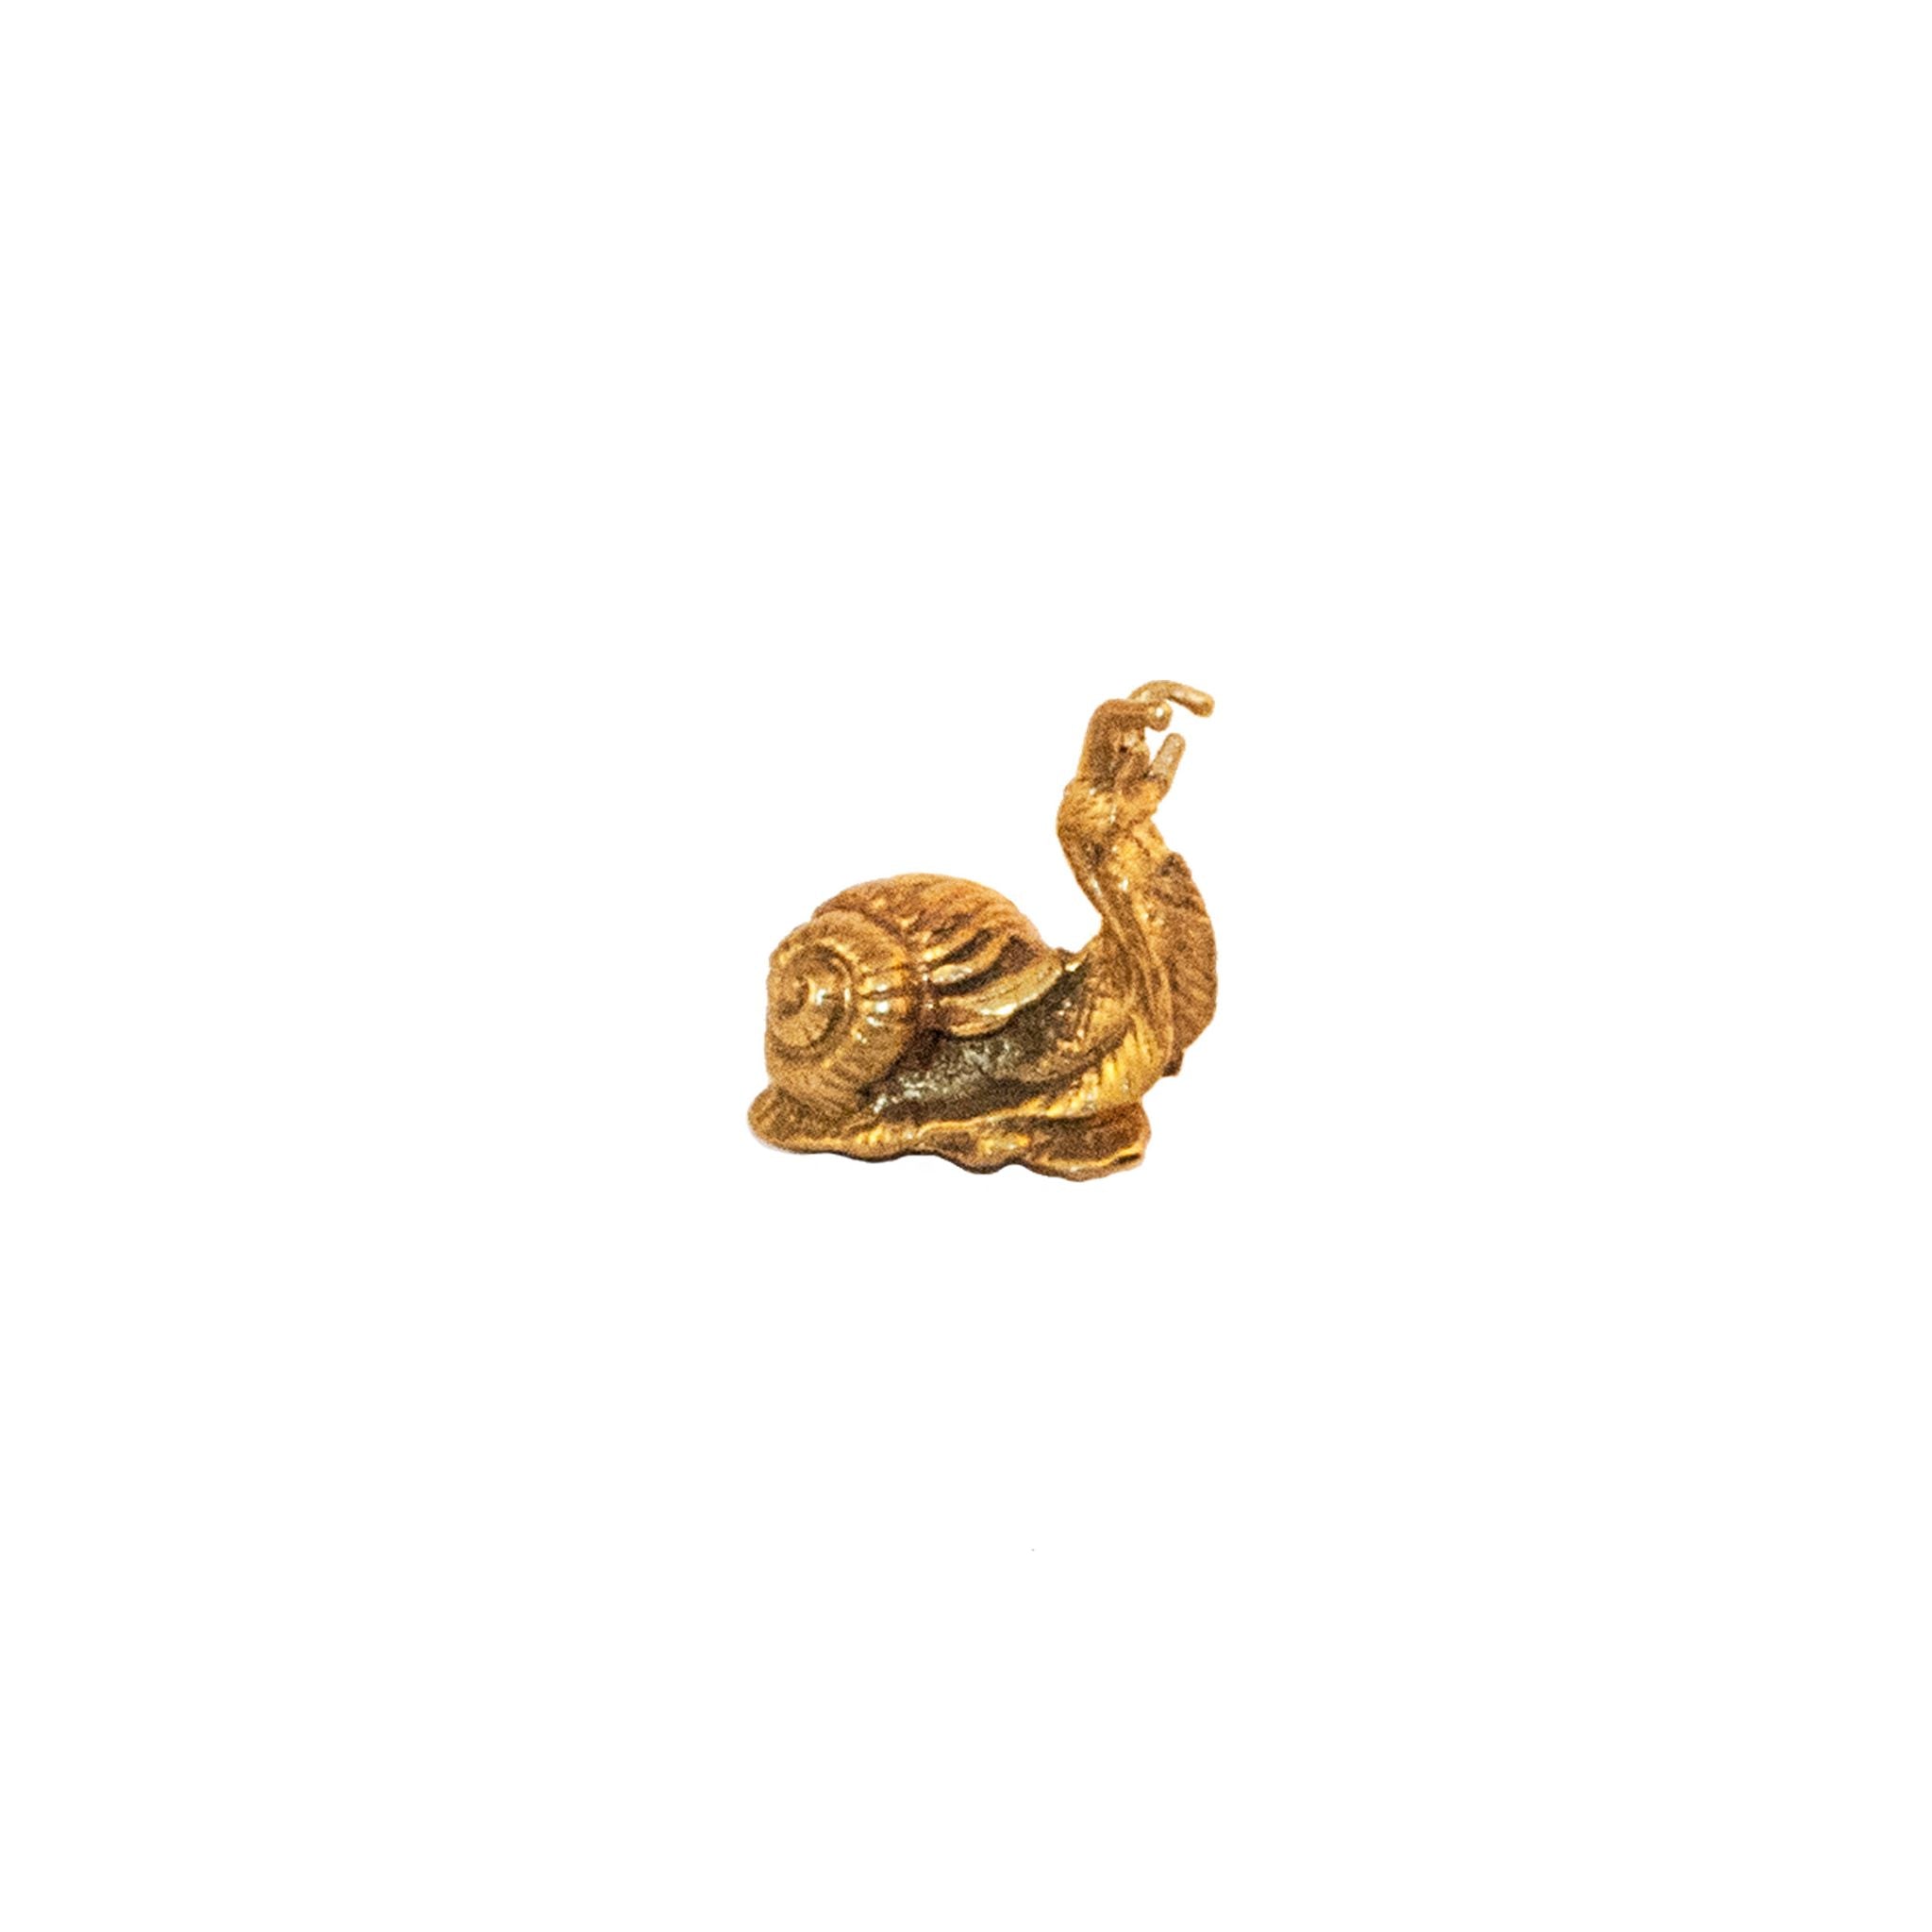 A medium-sized brass knob shaped like a snail, featuring detailed craftsmanship.